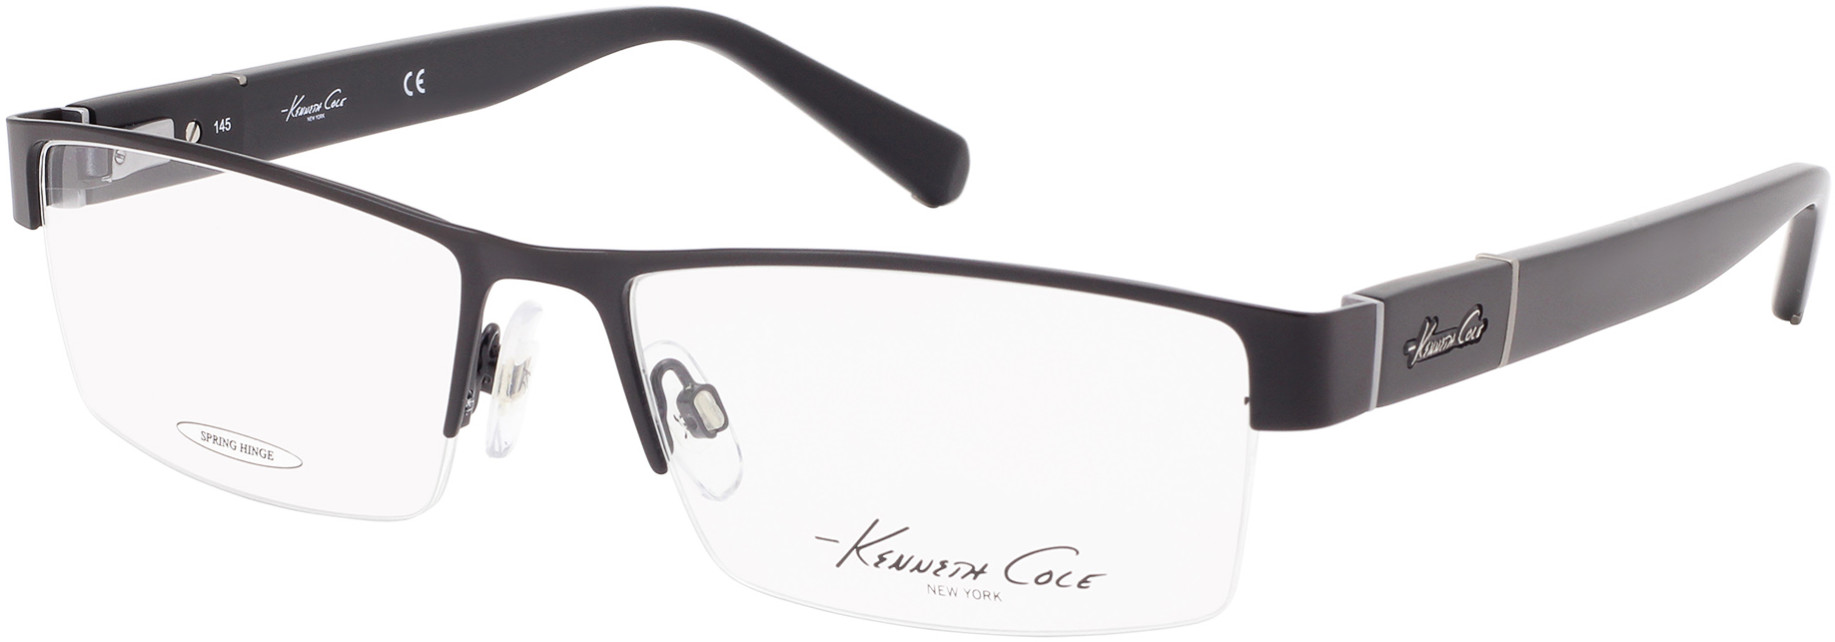 KENNETH COLE NY 0217 002